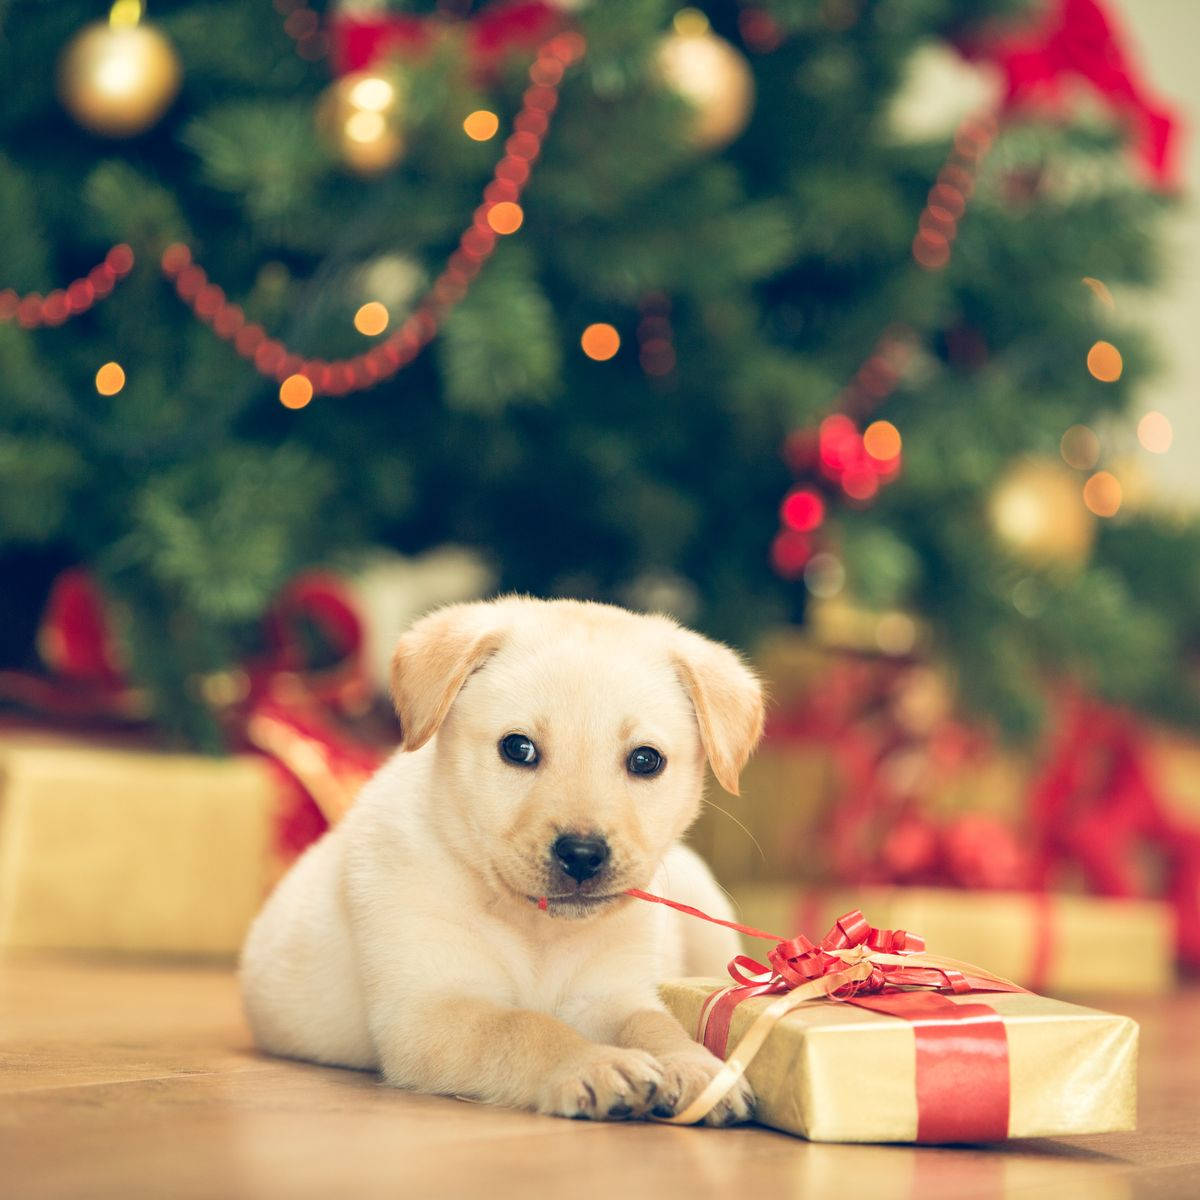 Puppy And Christmas Present Background